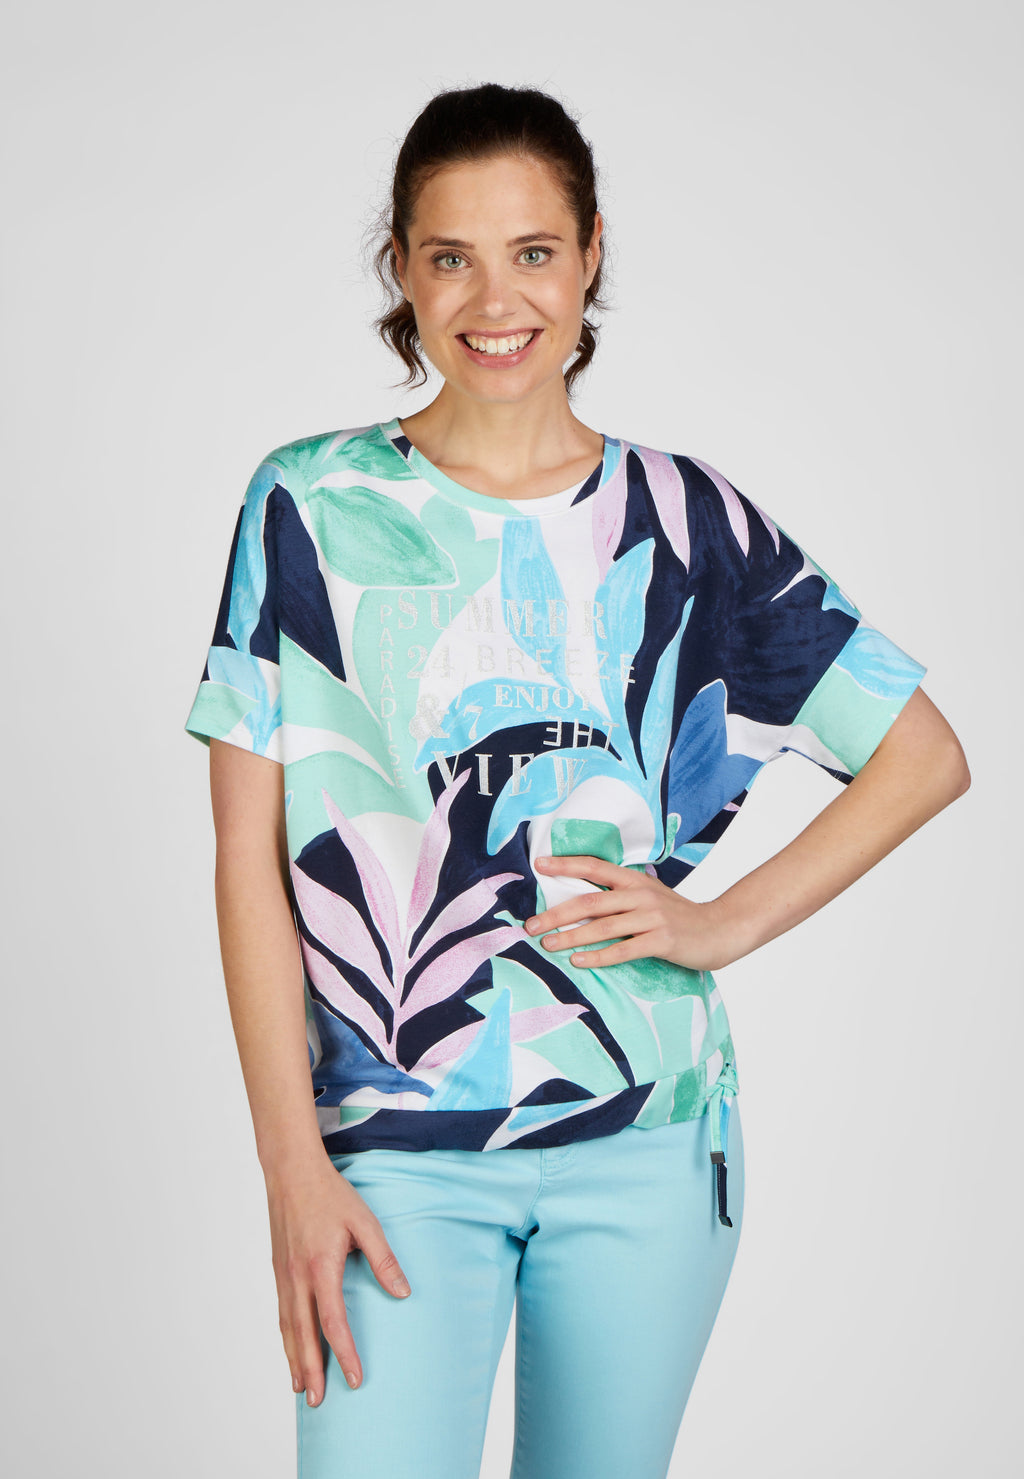 Rabe salty breeze collection drawstring hem printed tshirt, product coded 52-223354